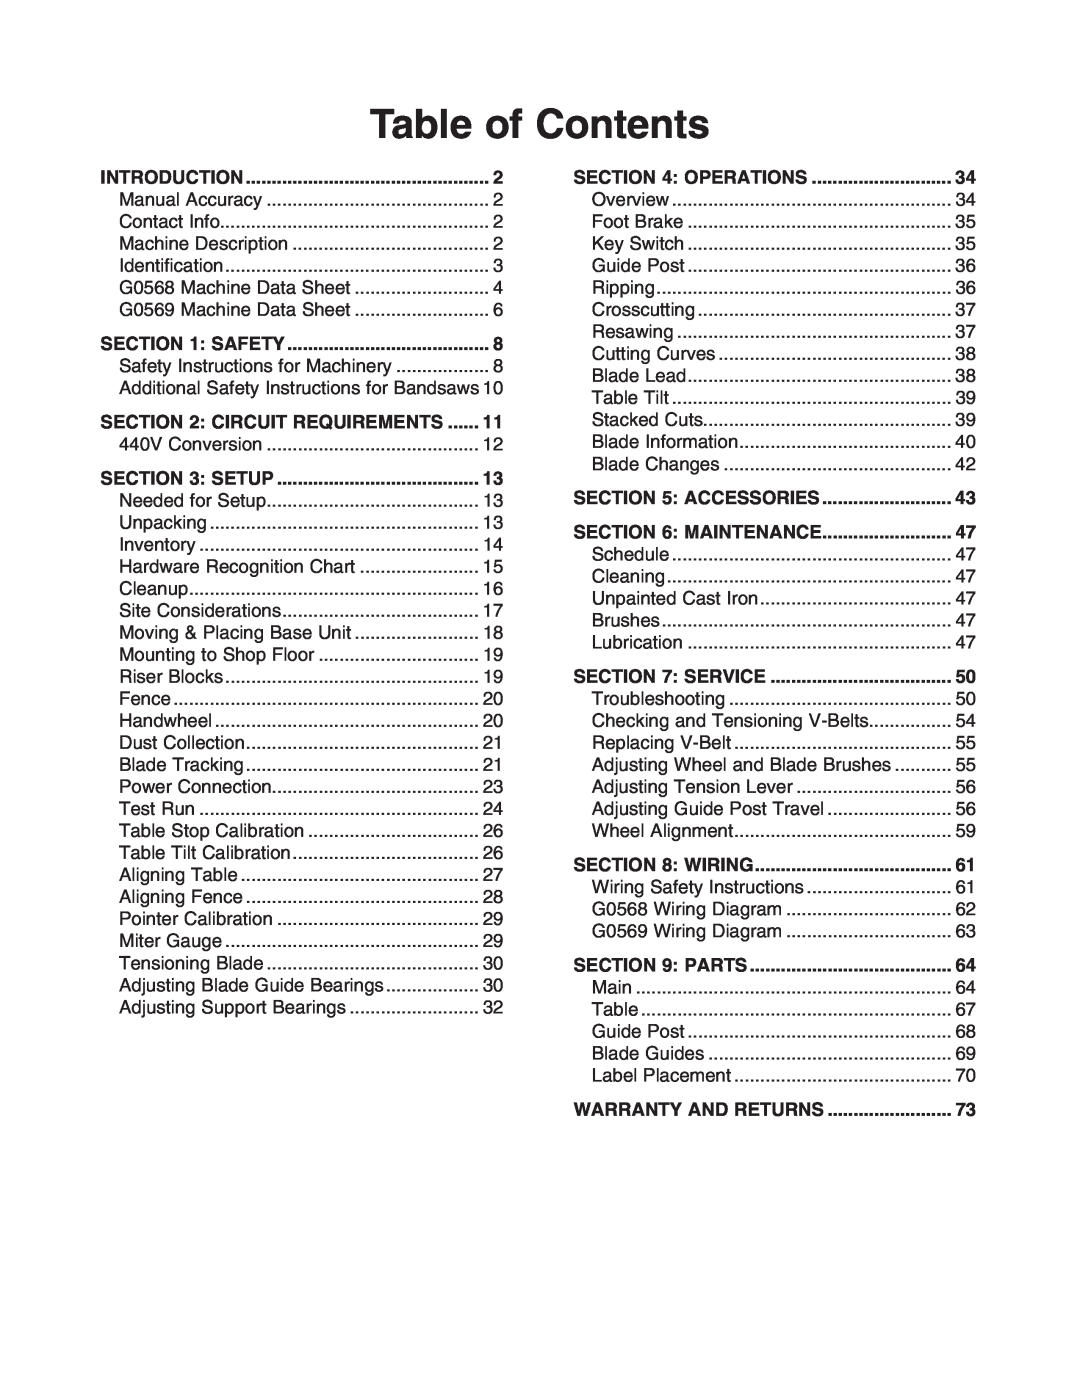 Grizzly G0568 Table of Contents, Circuit Requirements, Setup, Operations, Accessories, Maintenance, Service, Wiring, Parts 